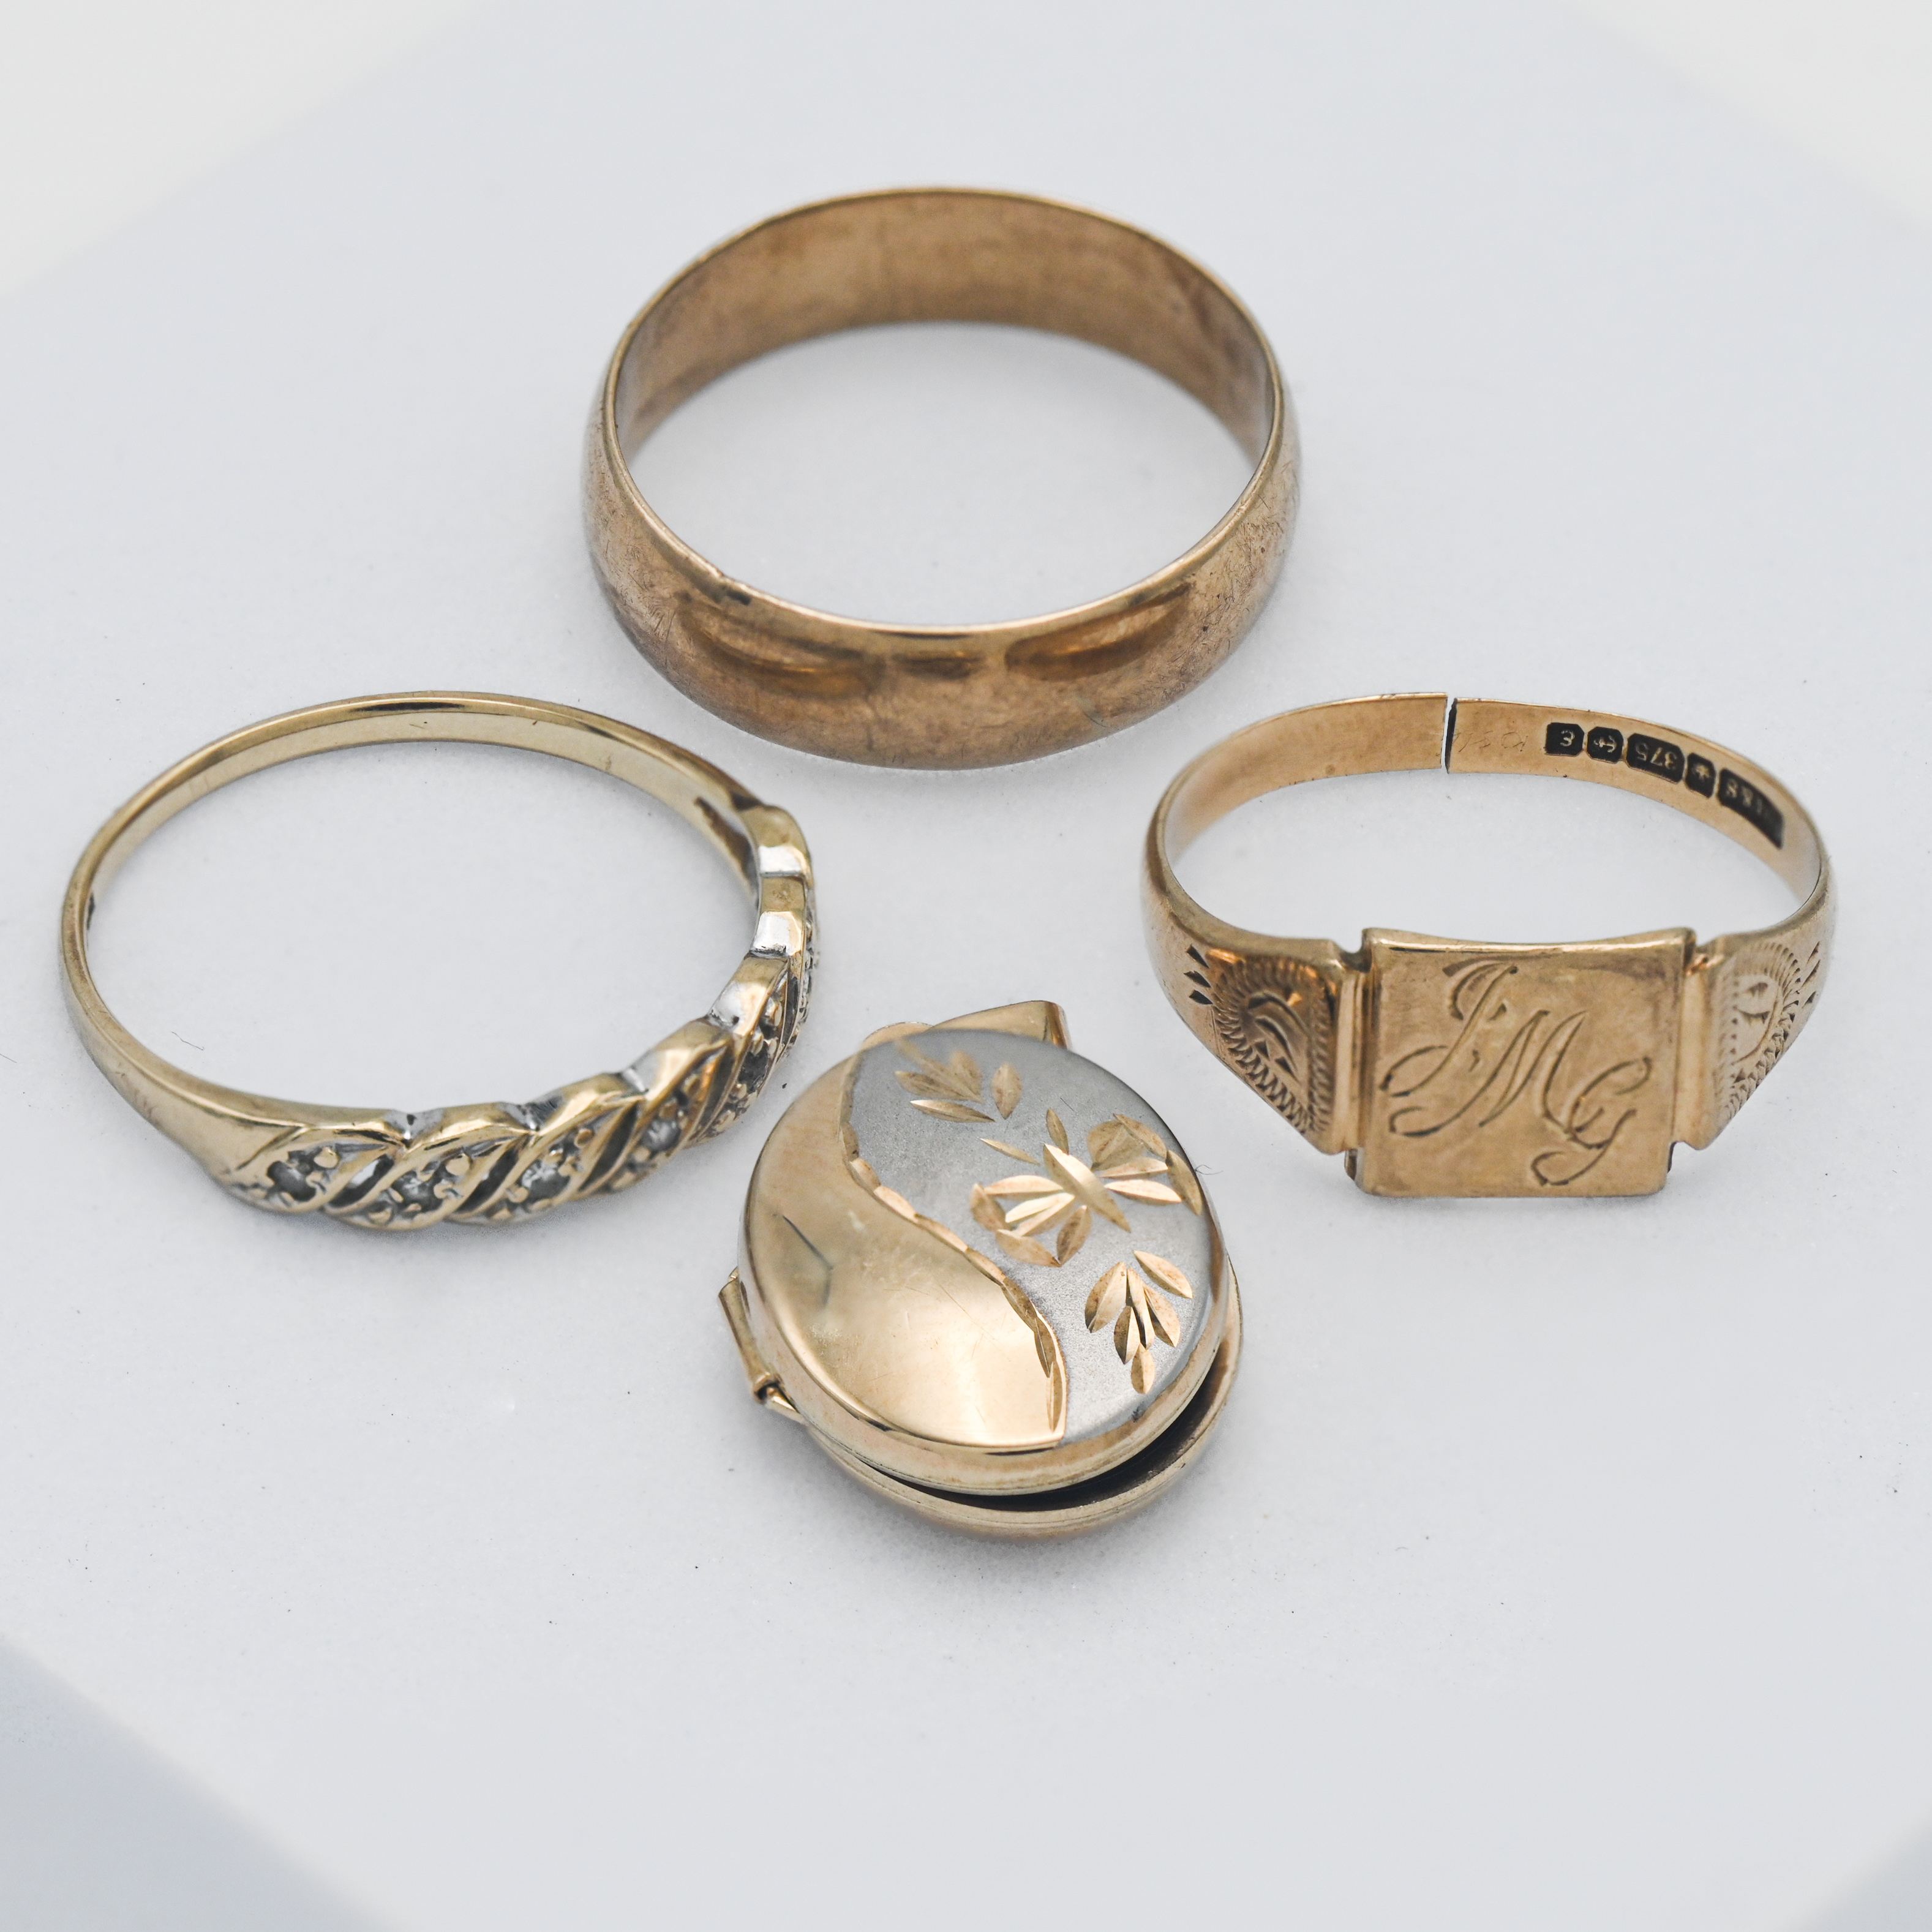 A 9ct wedding band and signet ring (4.50g) together with a 9ct dress ring and a locket (2.40g).